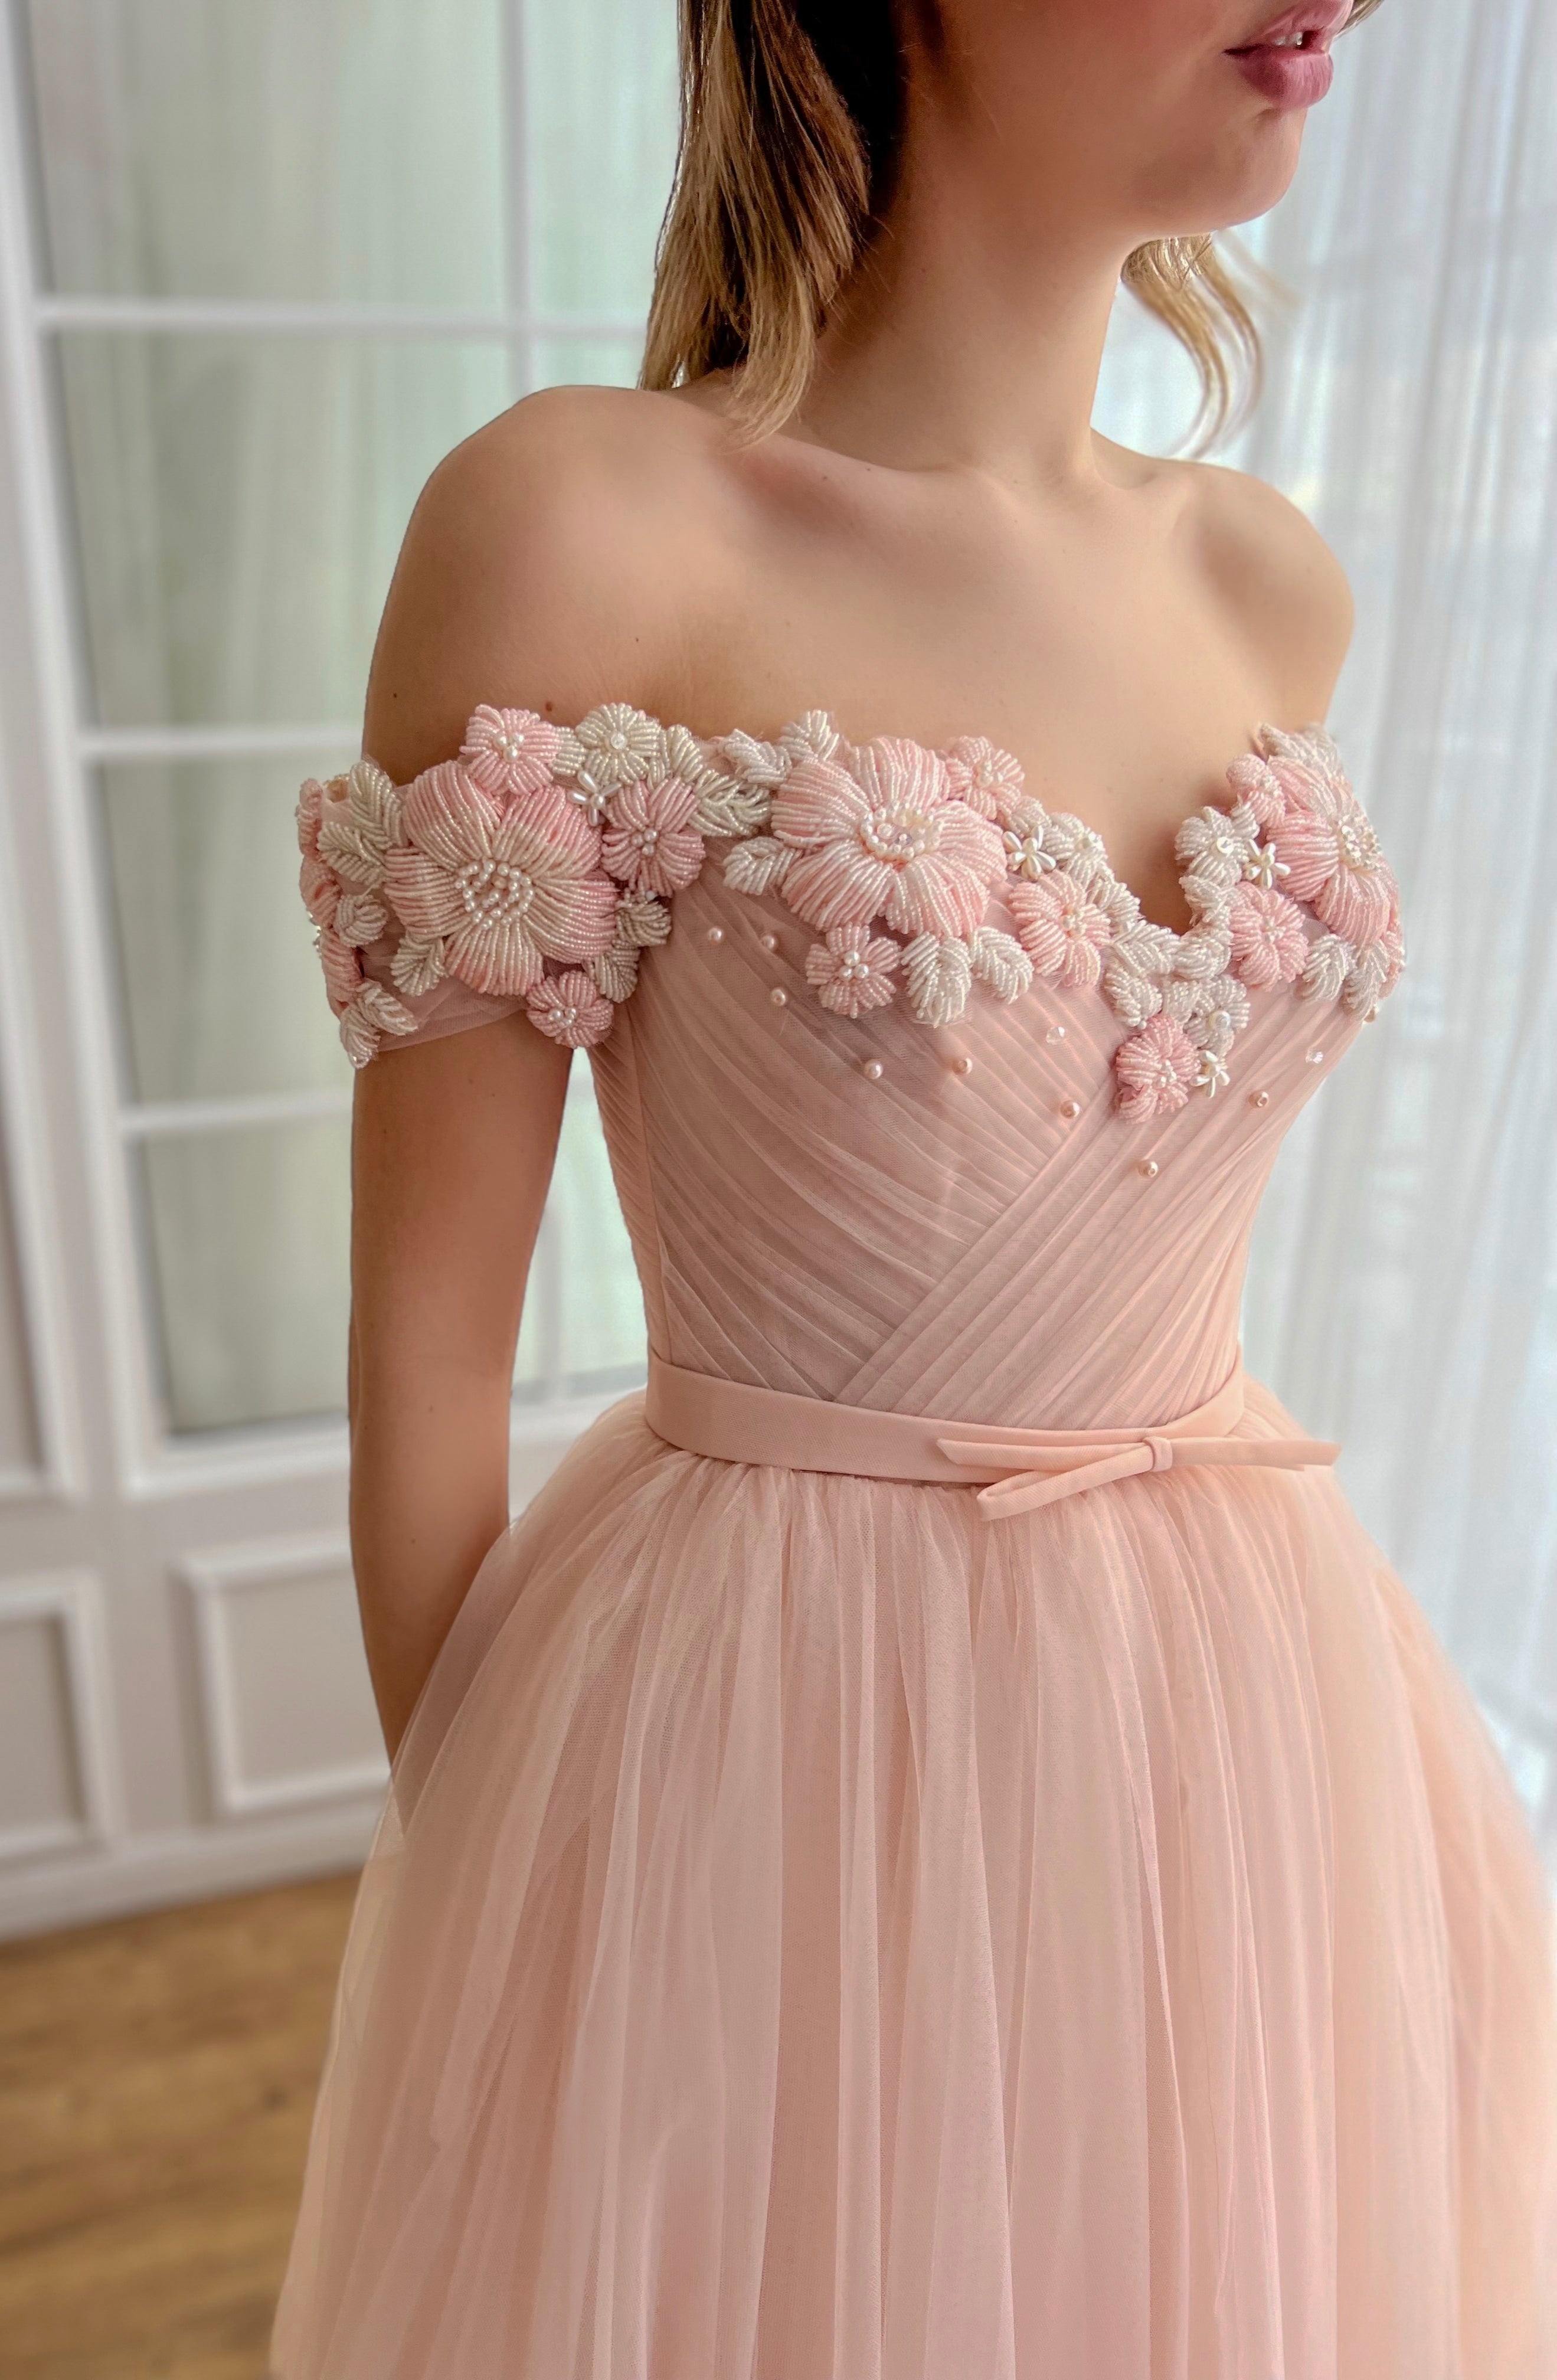 Peach midi dress with off the shoulder sleeves and embroidery